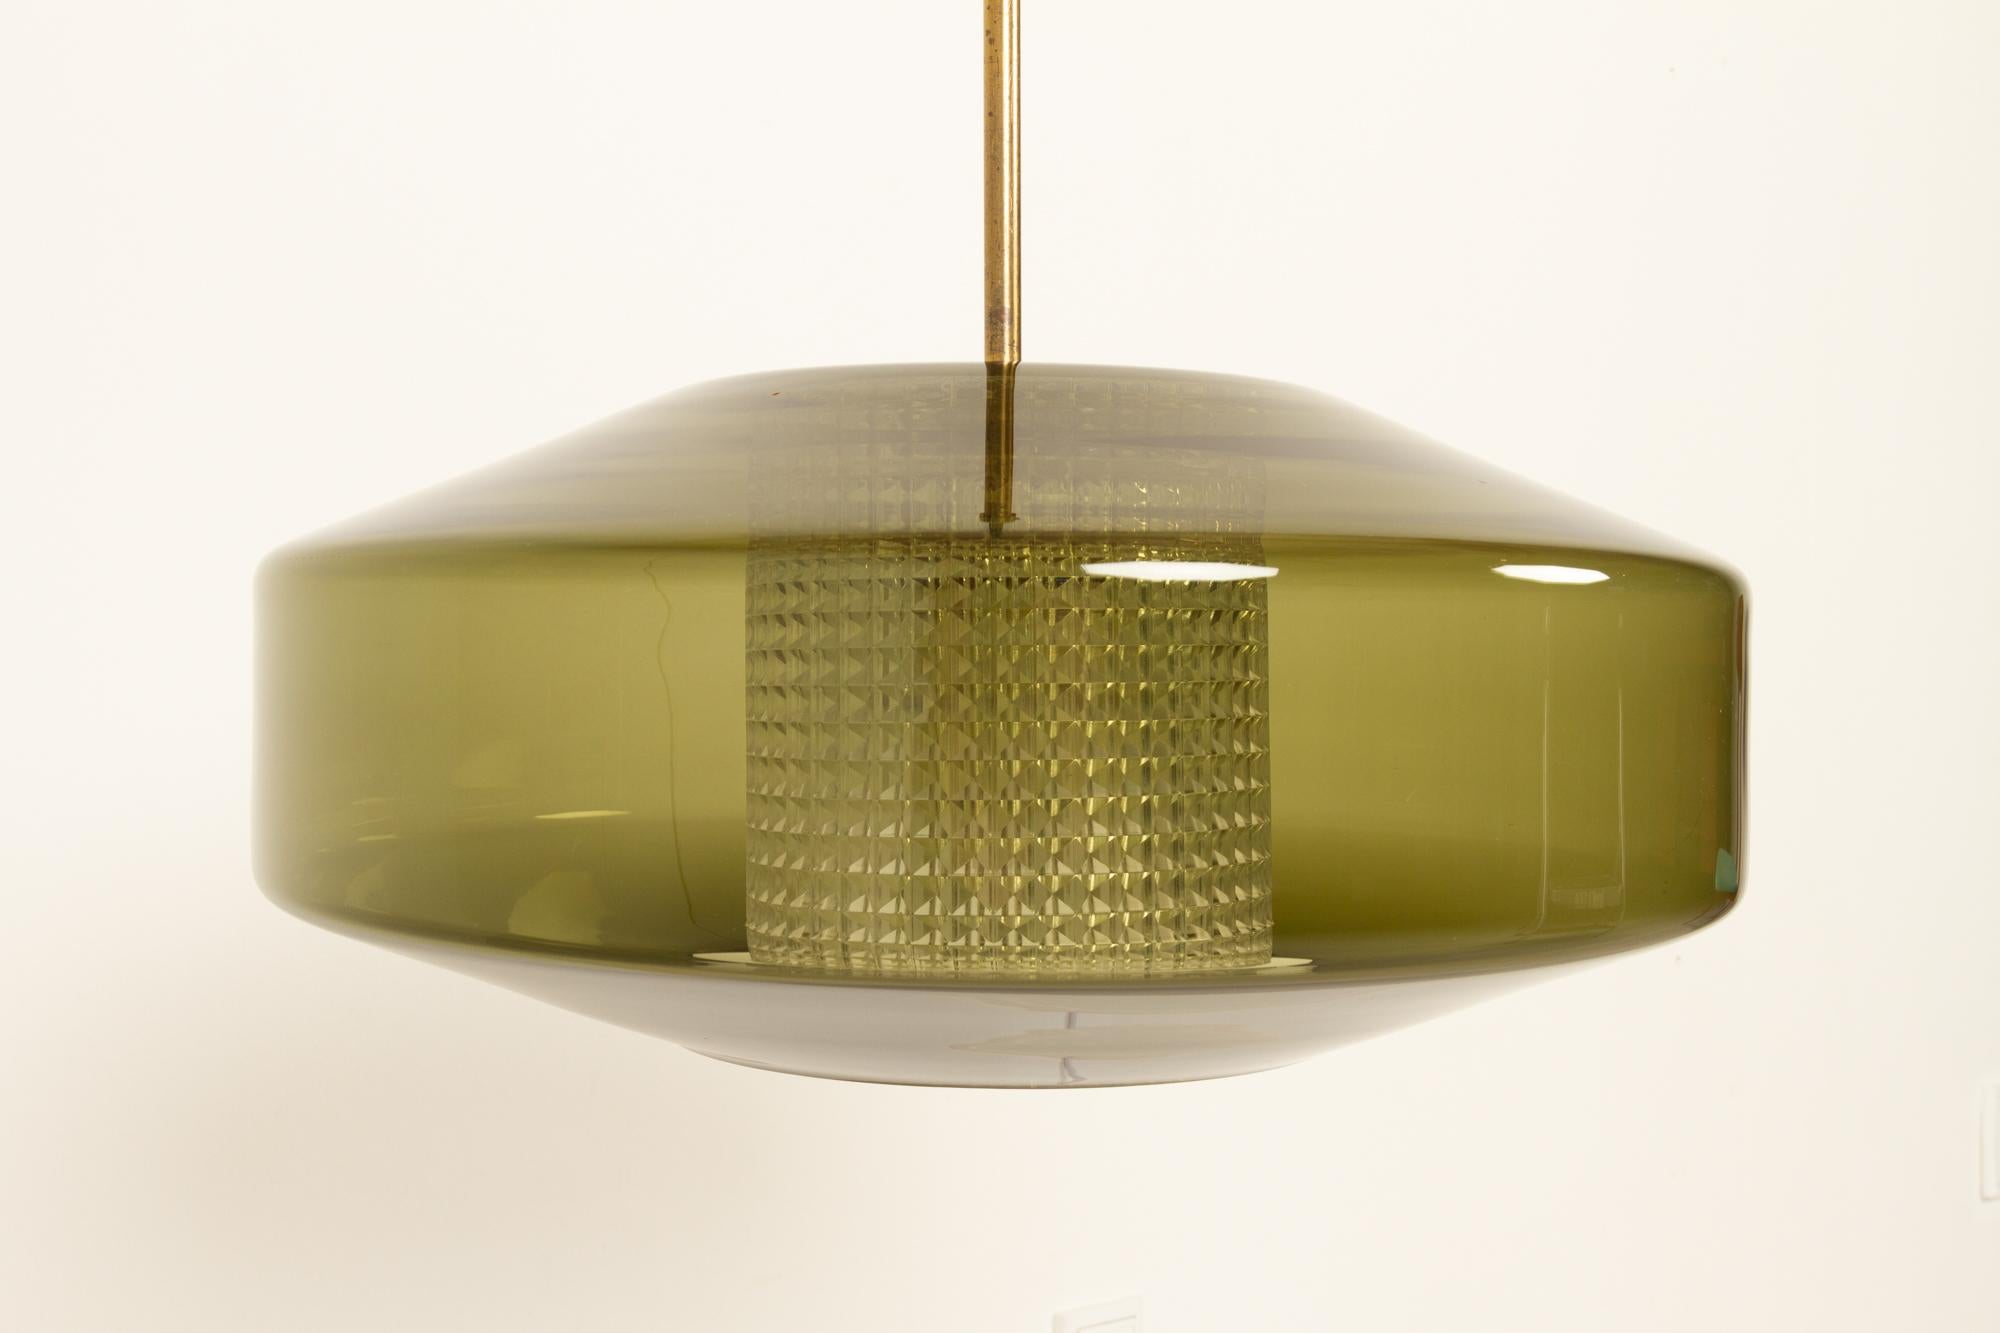 Scandinavian Modern large green glass pendant by Carl Fagerlund for Orrefors 1960s
Beautiful and rare large ceiling lamp from the 60s. Designed by Carl Fagerlund for Orrefors Sweden. Outer shade in hand blown moss green transparent glass and inner